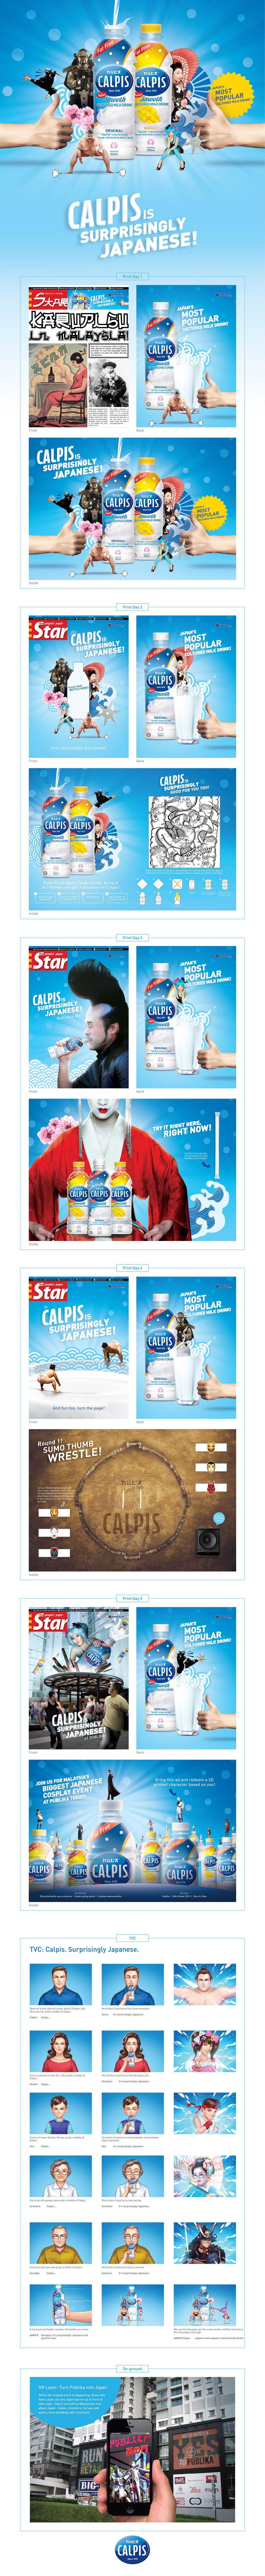 campaign japanese cultured milk calpis FMCG beverages launch print ad tvc